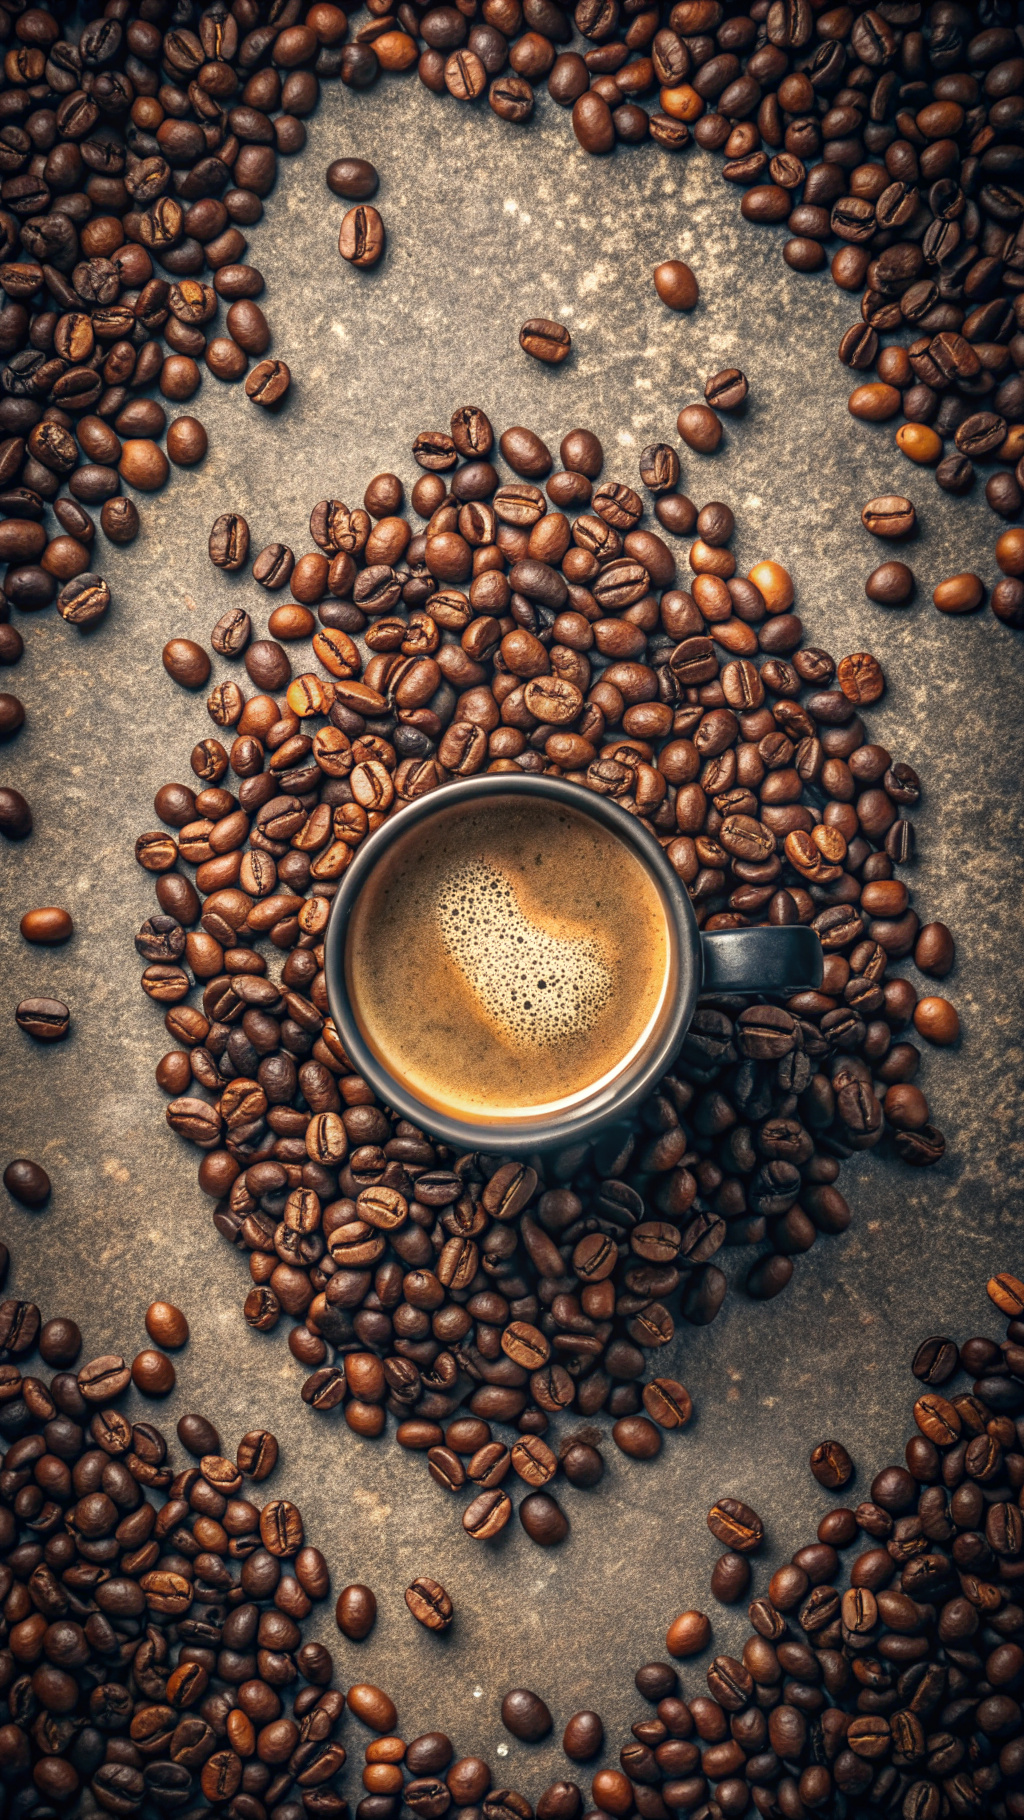 Coffee beans background and a cup of coffee in the center is buried in beans, gray, beige, brown tones, muted shades of colors, grunge, Scandinavian style,